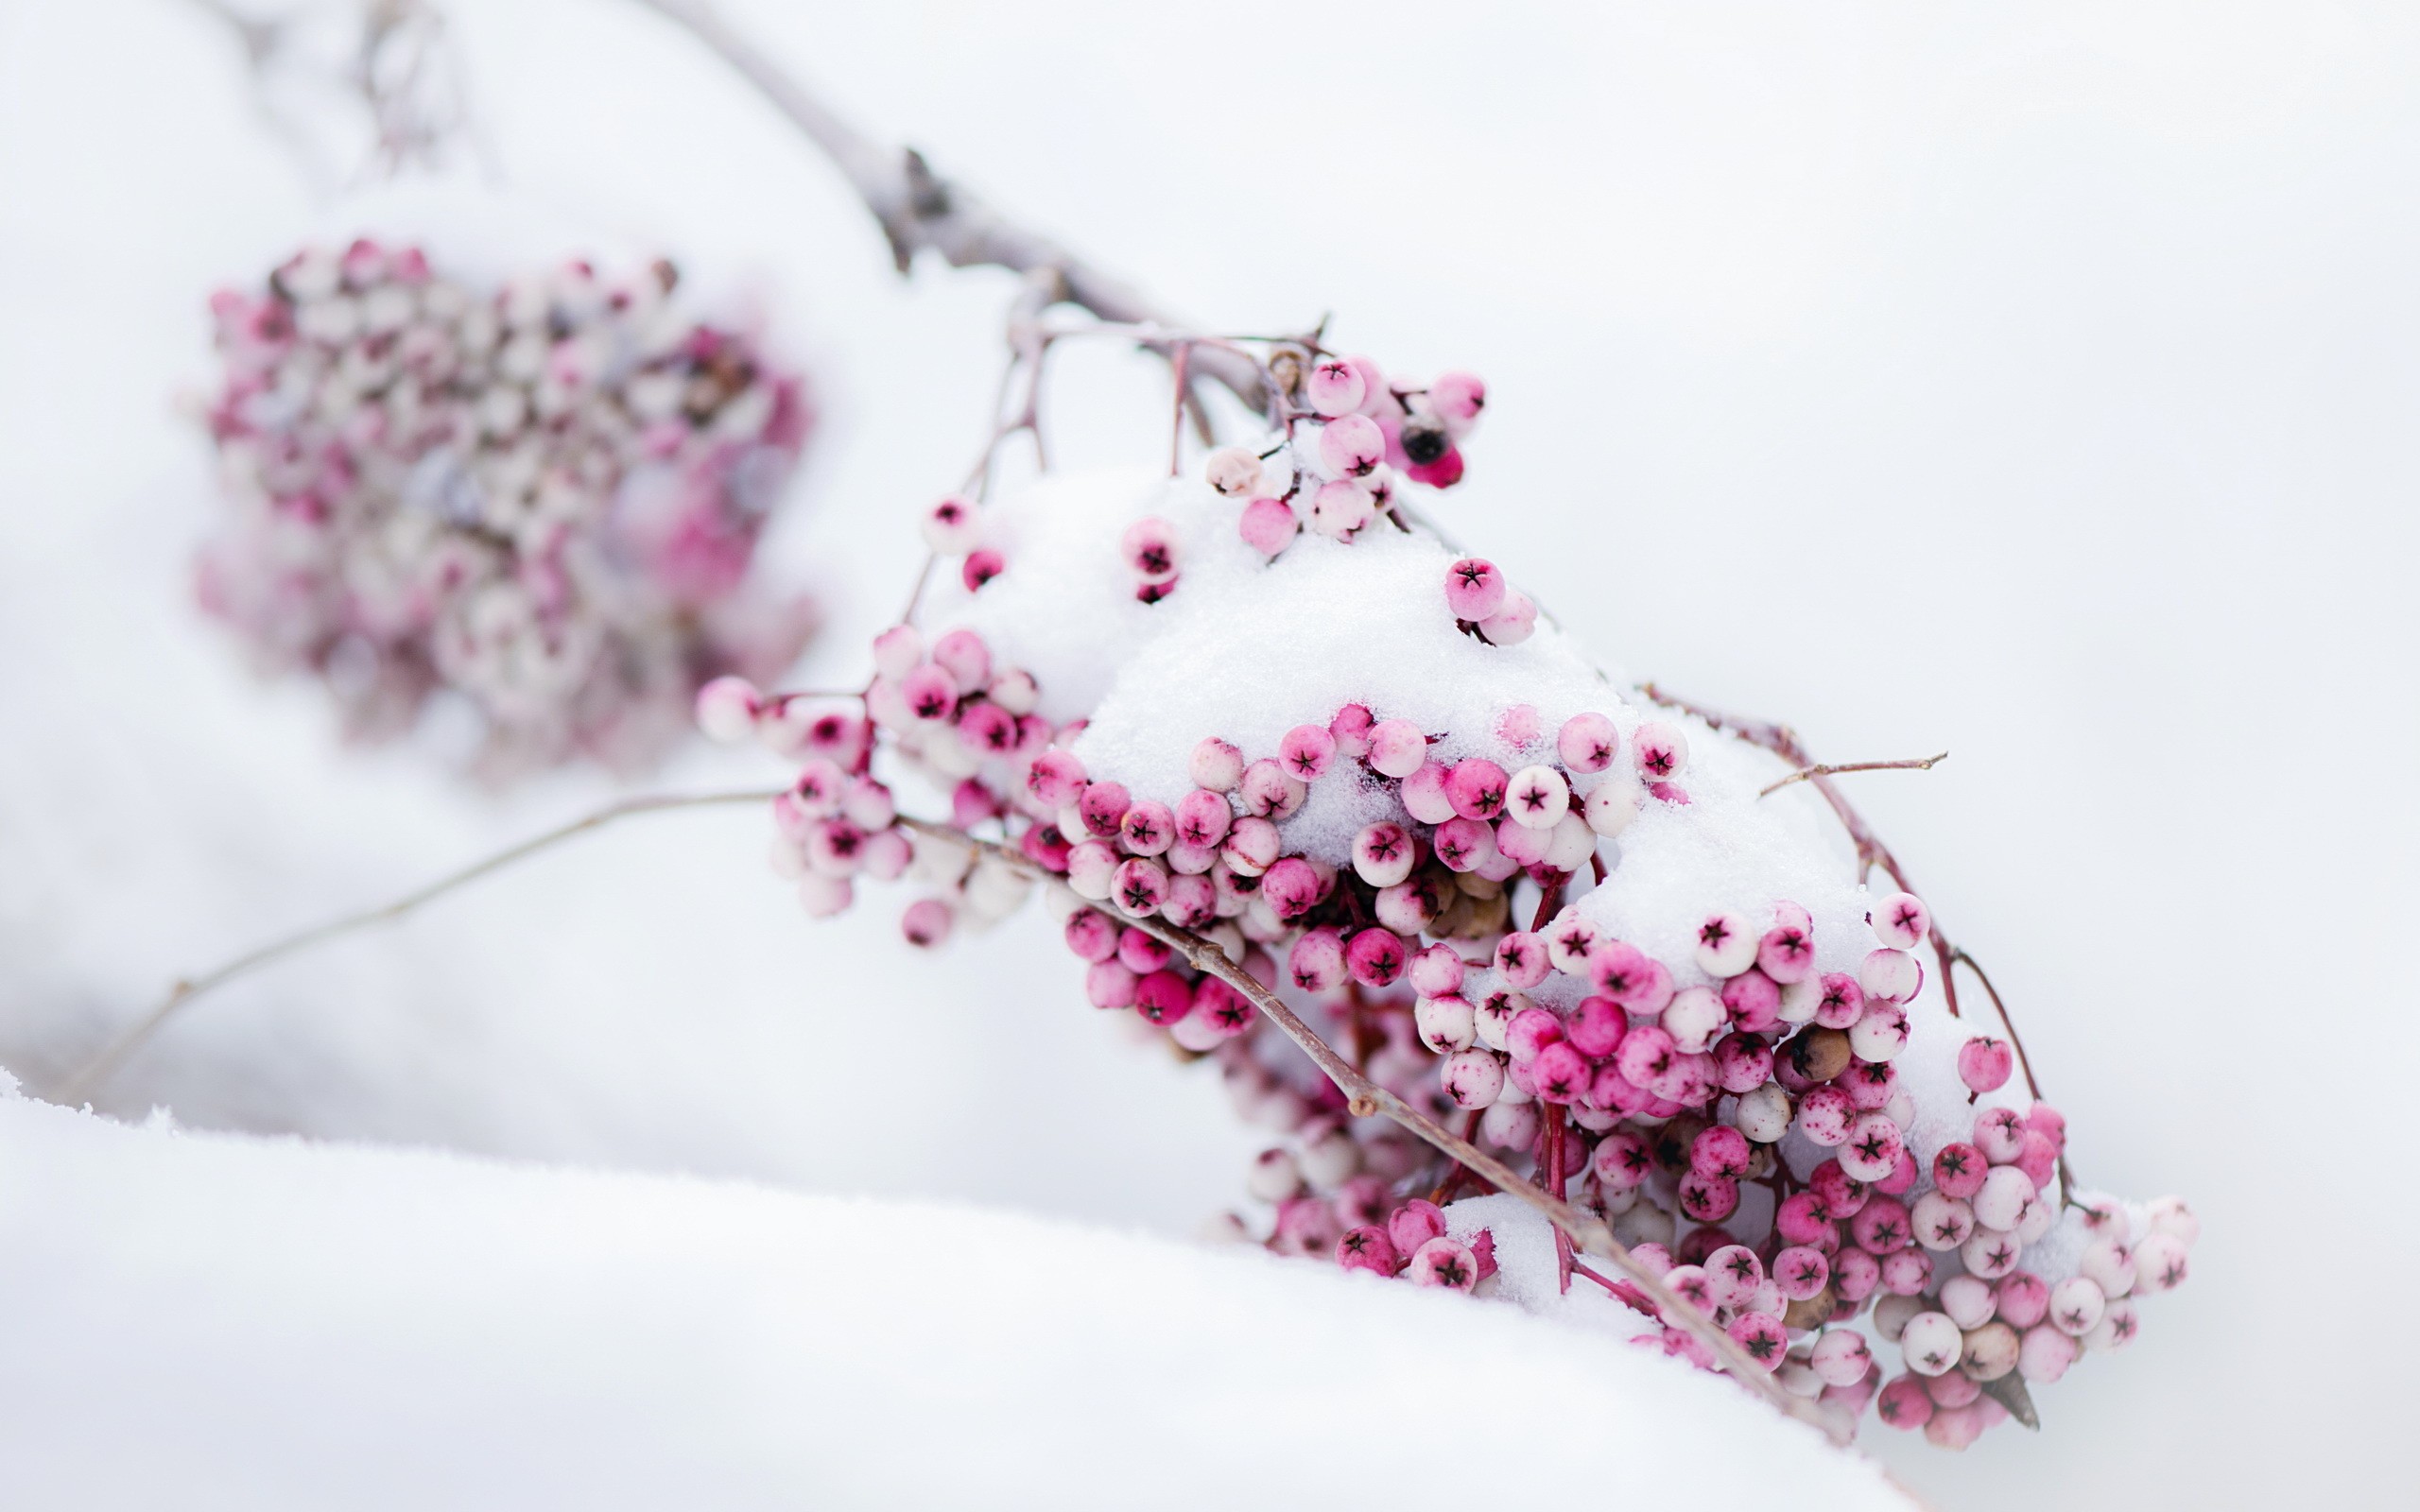 General 2560x1600 plants snow fruit pink cold frost ice nature outdoors berries closeup